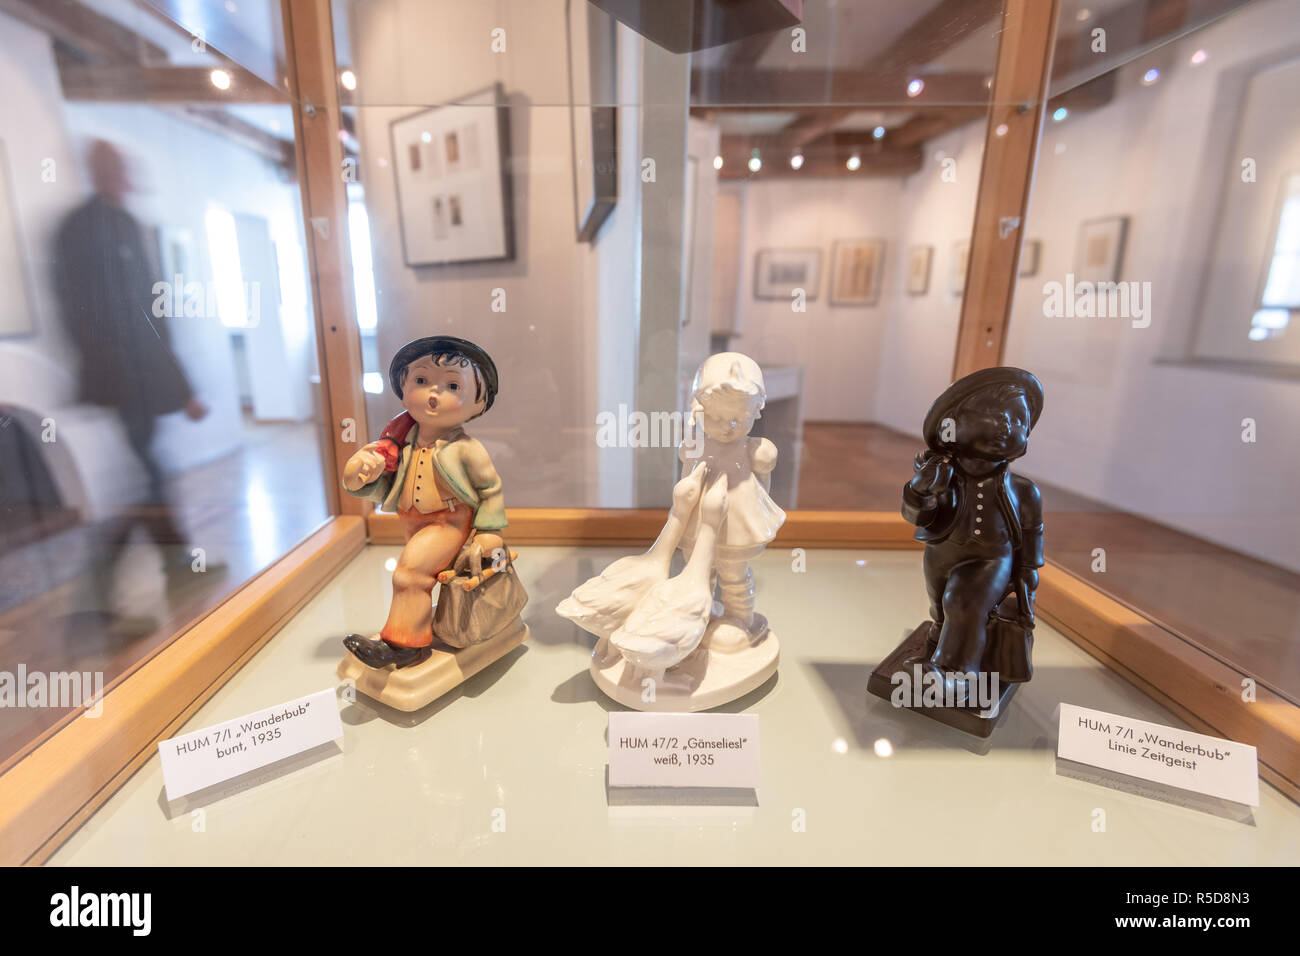 Massing, Germany. 29th Nov, 2018. The Hummel porcelain figures "Wanderbub", and "Wanderbub Linie Zeitgeist" are in a showcase in the Berta Hummel Museum. The museum is to be saved -